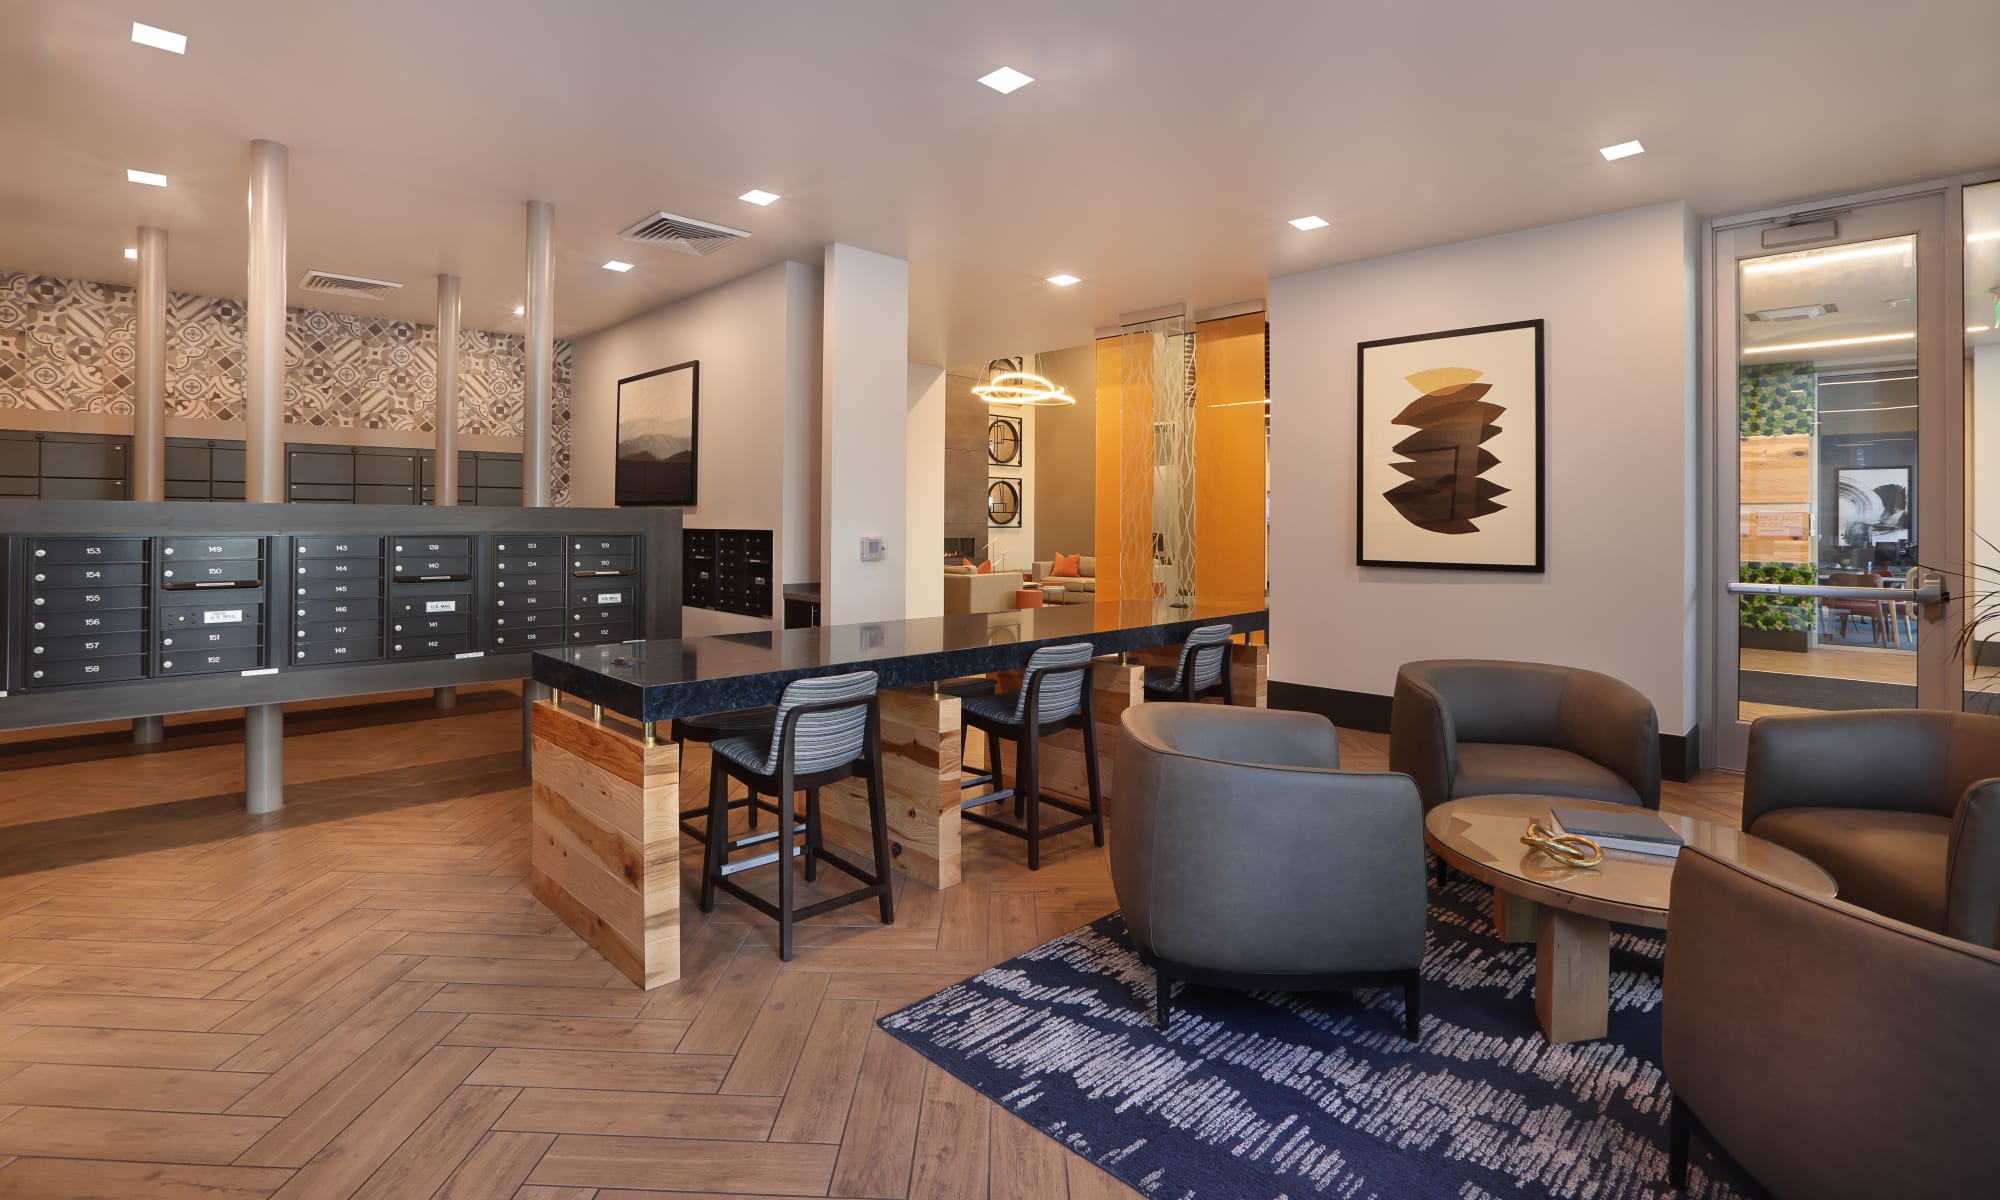 Uber lounge with curved chairs and mail room at Luxury high-rise community of Liberty SKY in Salt Lake City, Utah